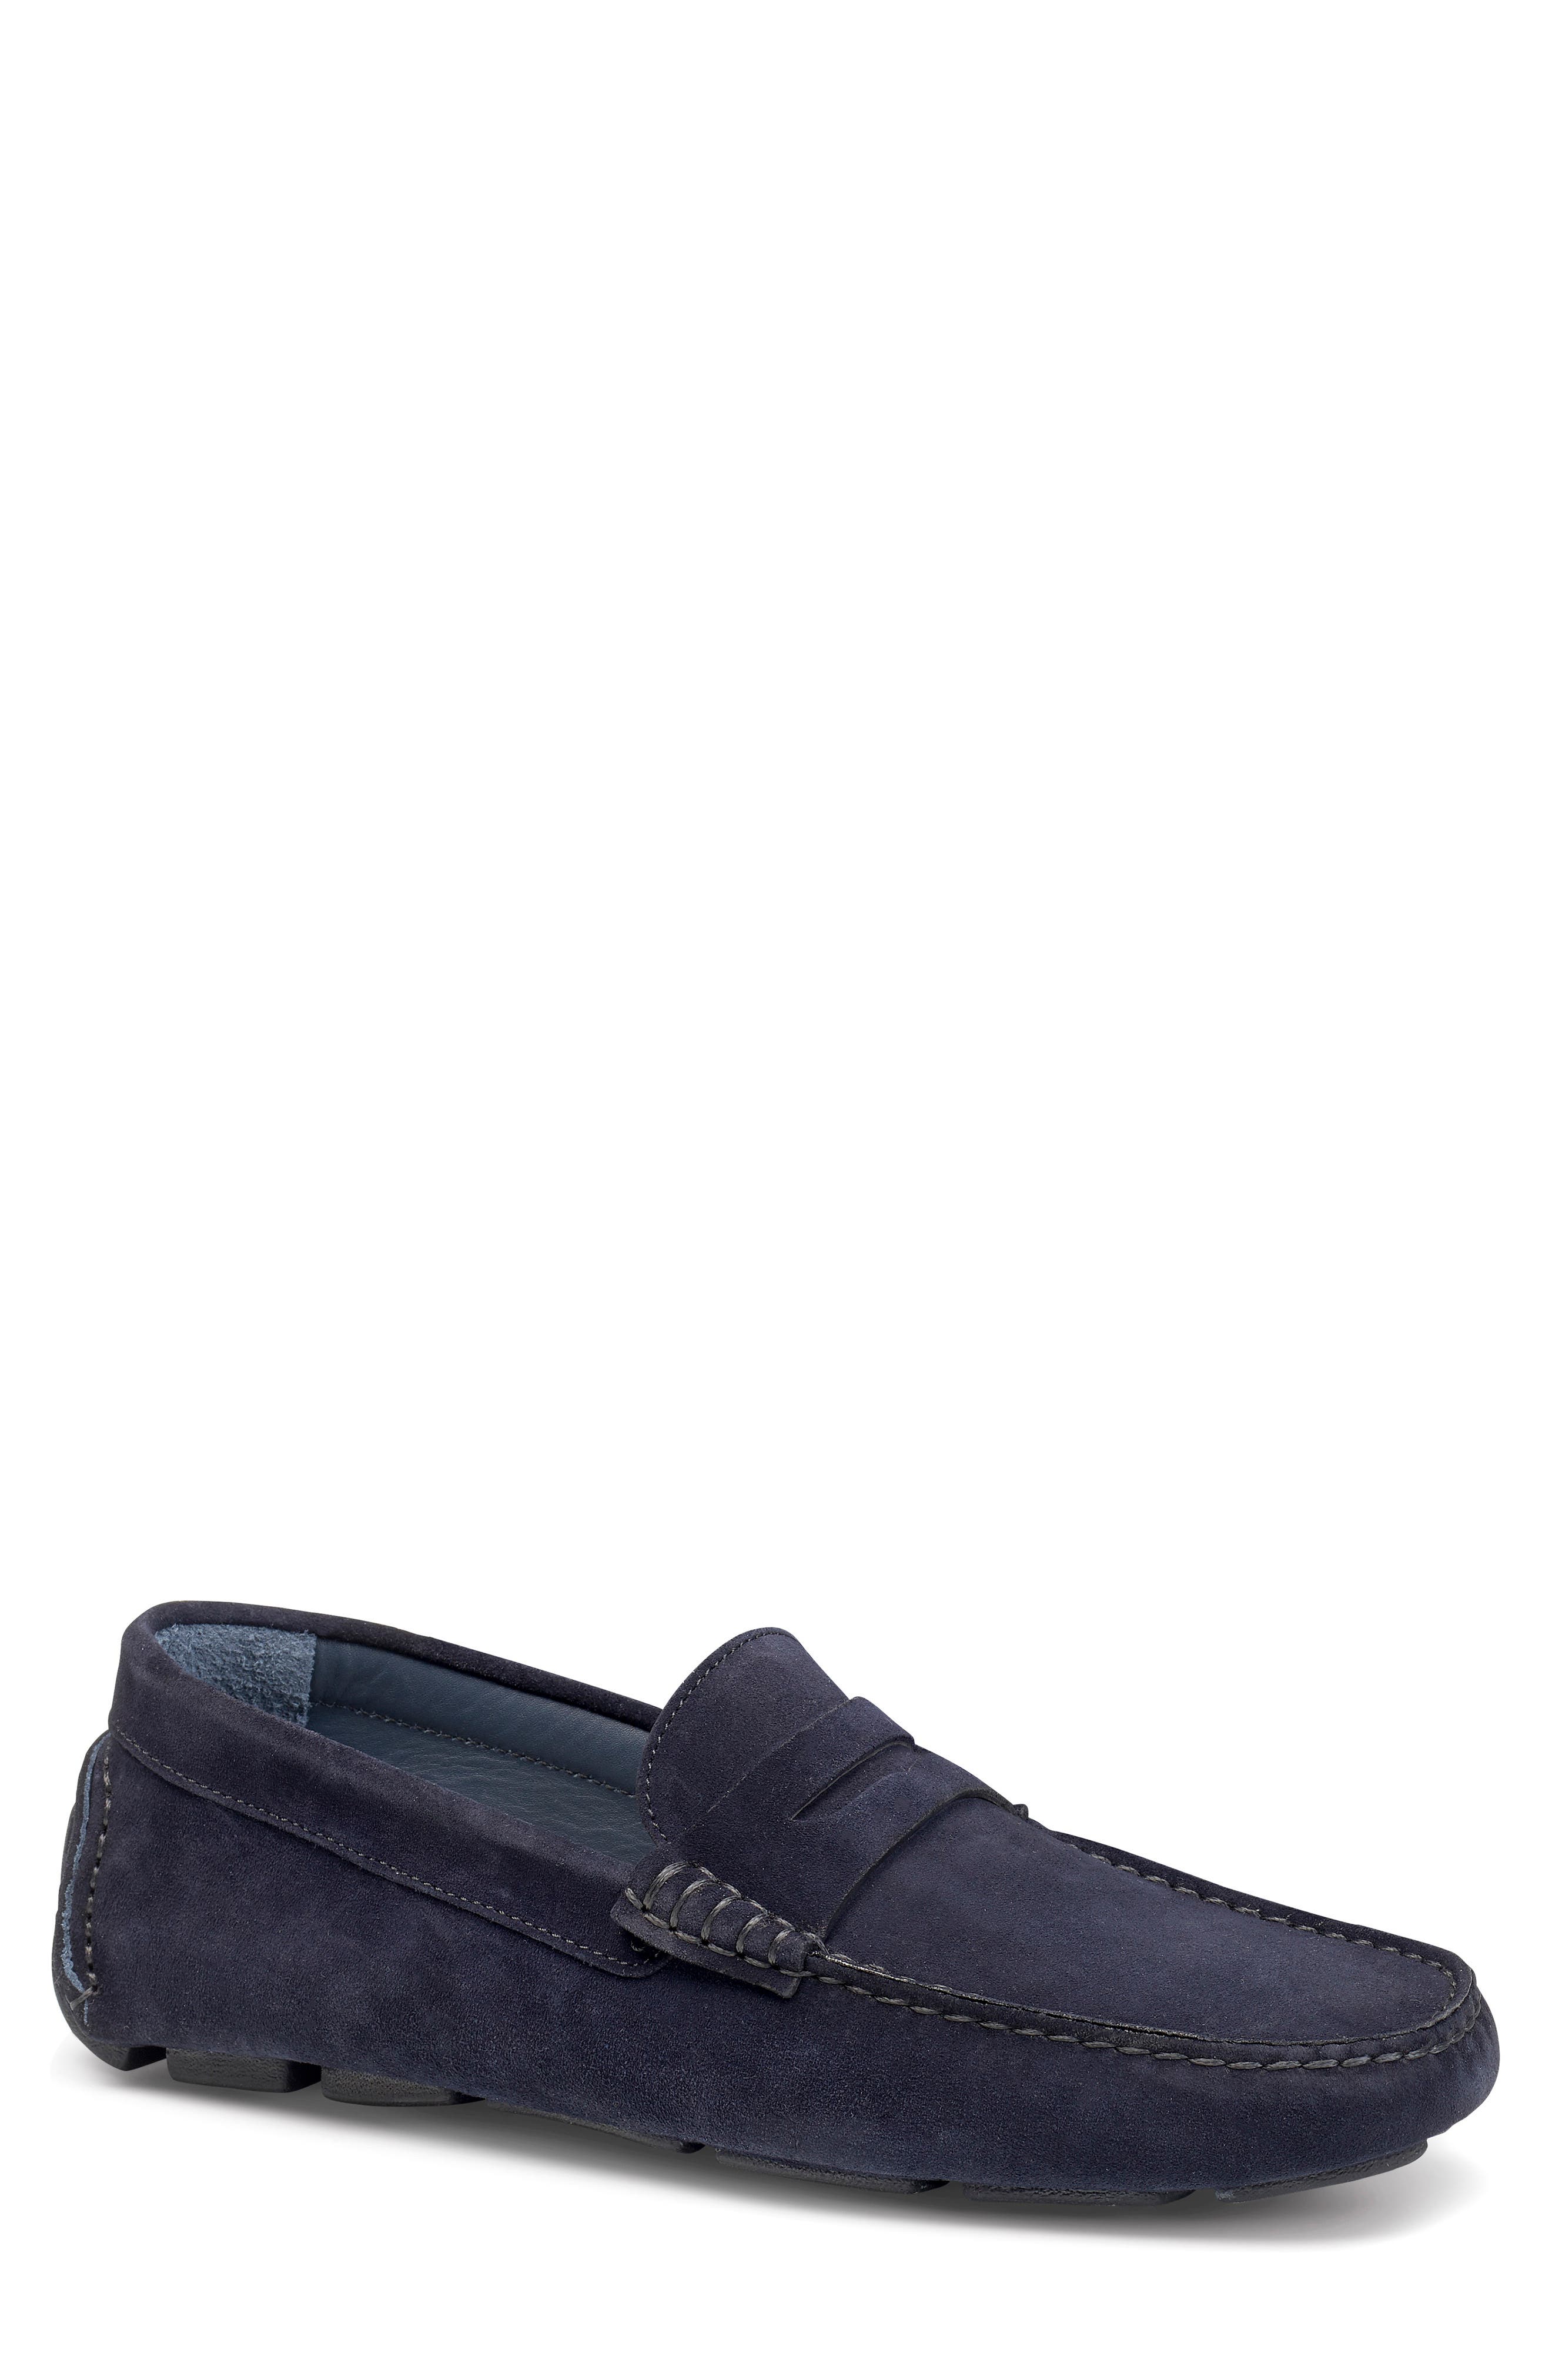 Trask Rowan Driving Penny Loafer In Navy Suede | ModeSens